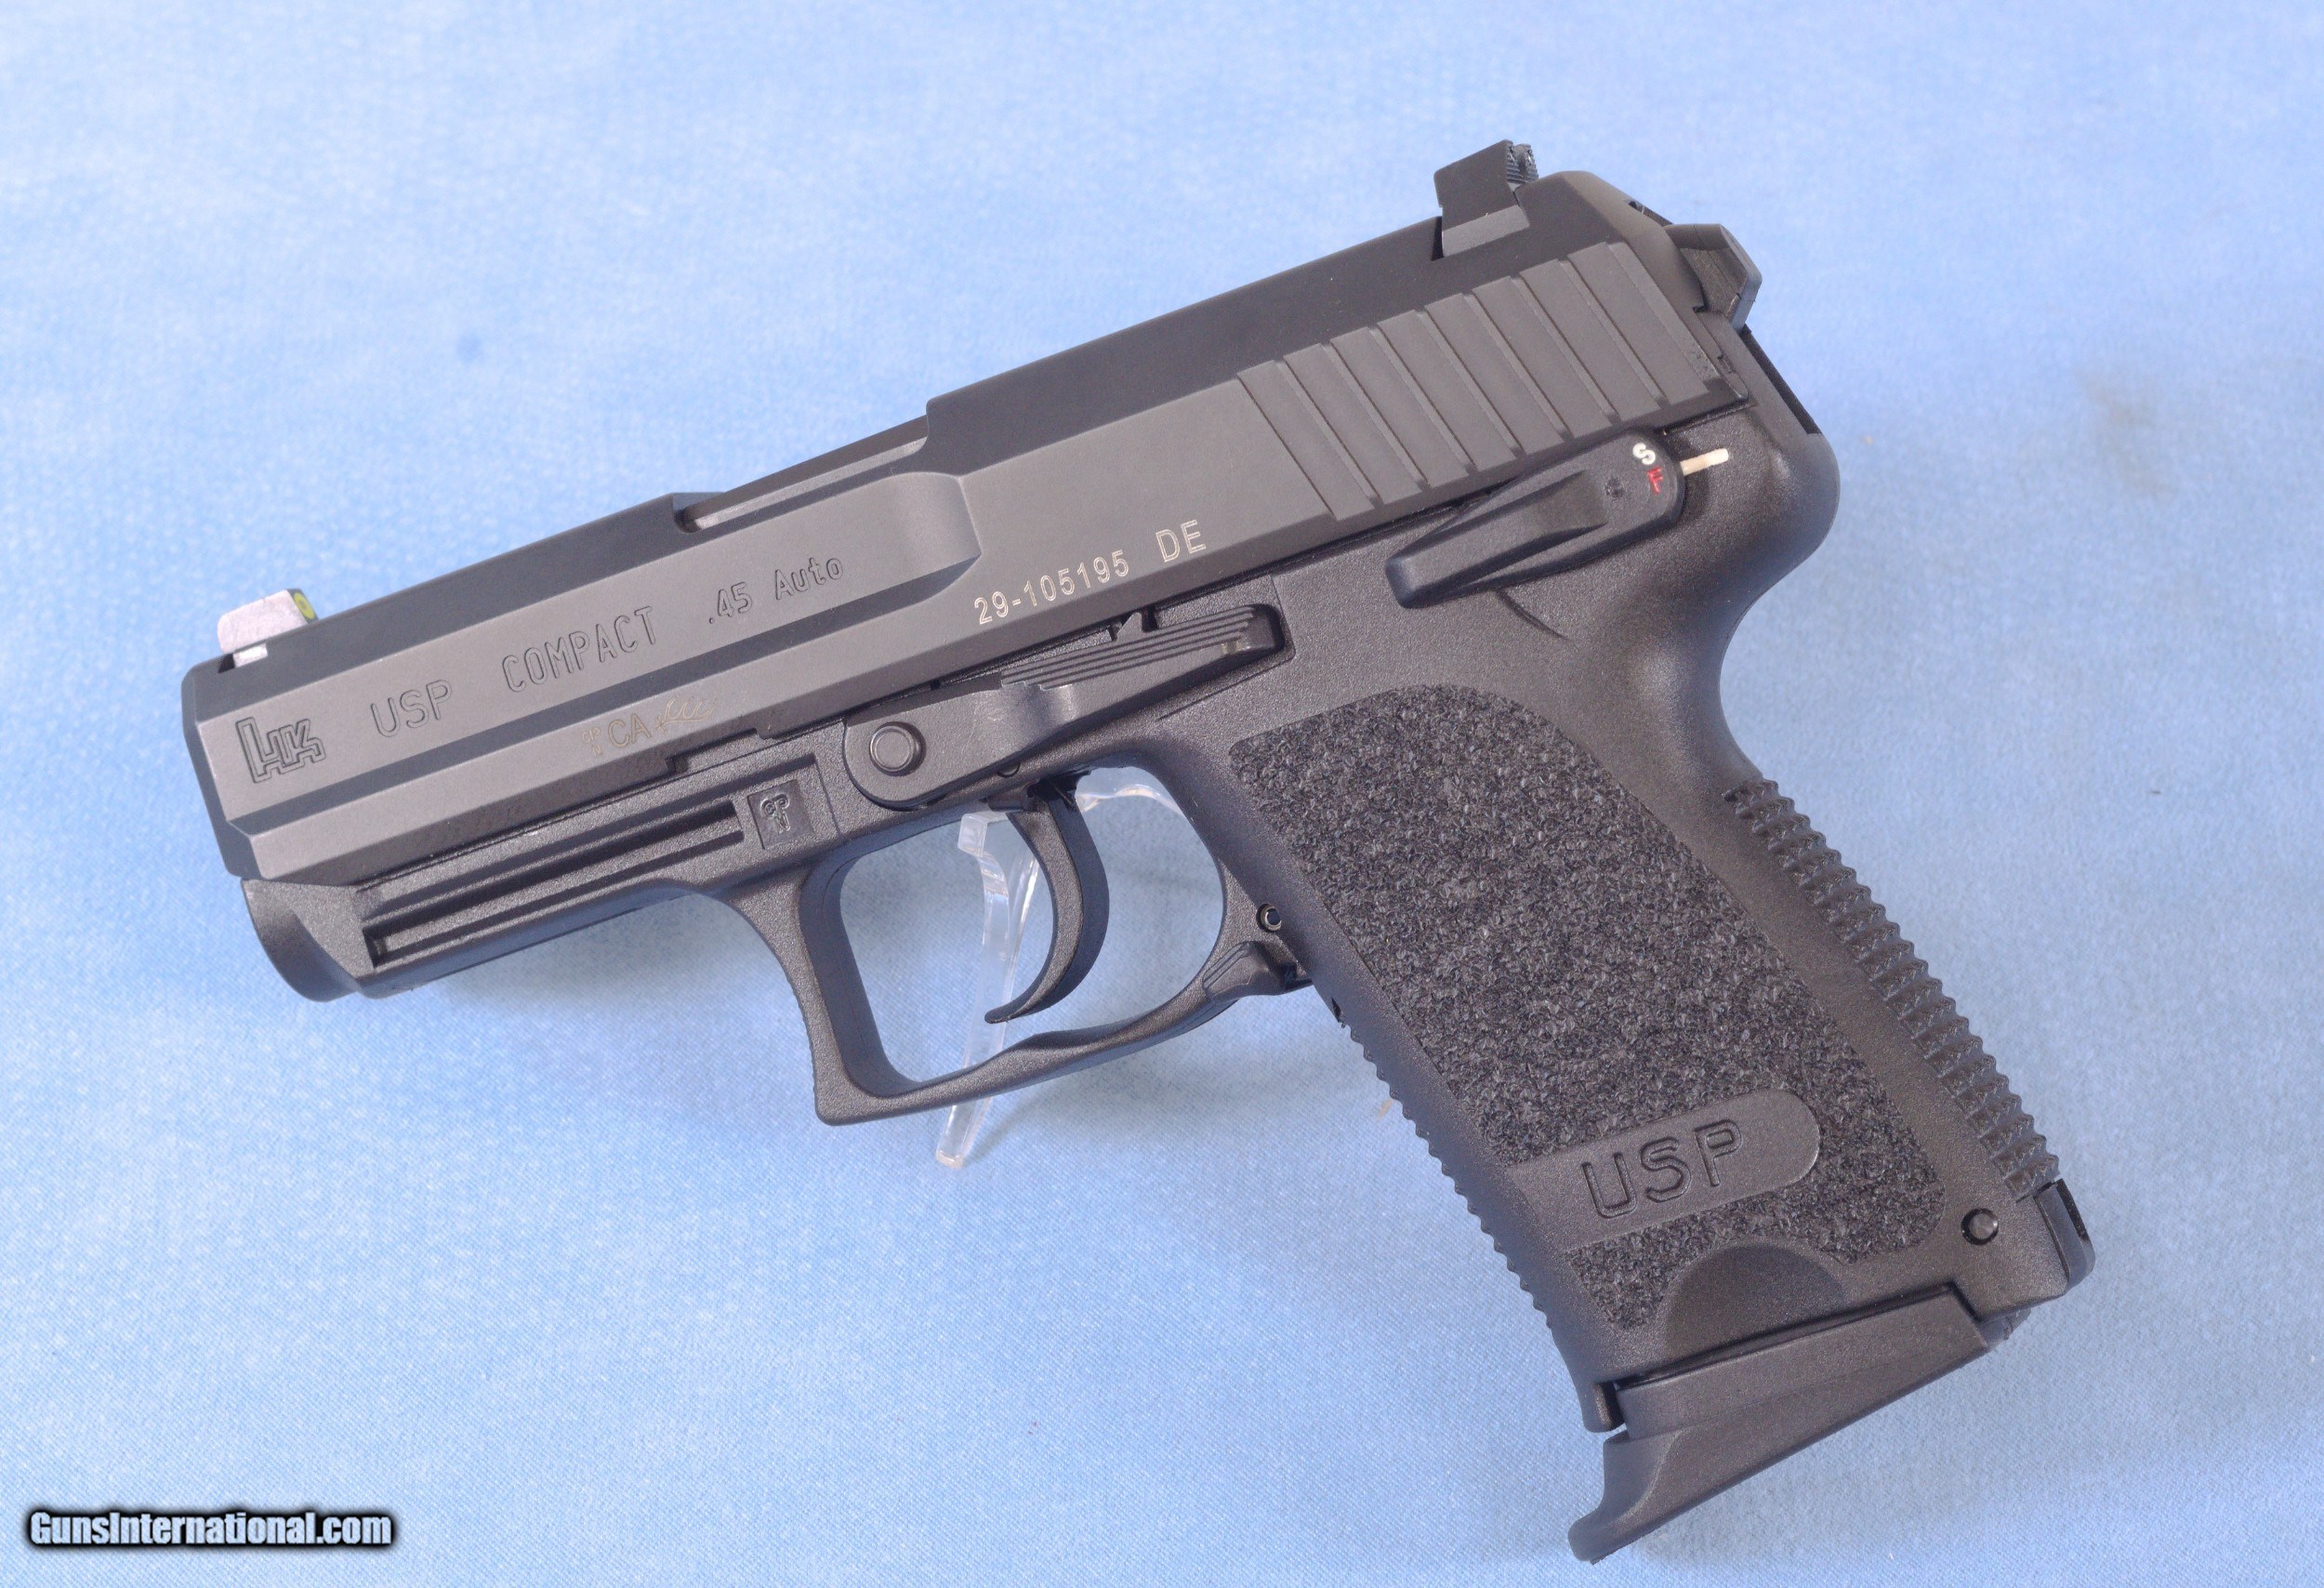 Heckler Koch Usp Compact Pistol Chambered In Auto Caliber Night Sights German Made